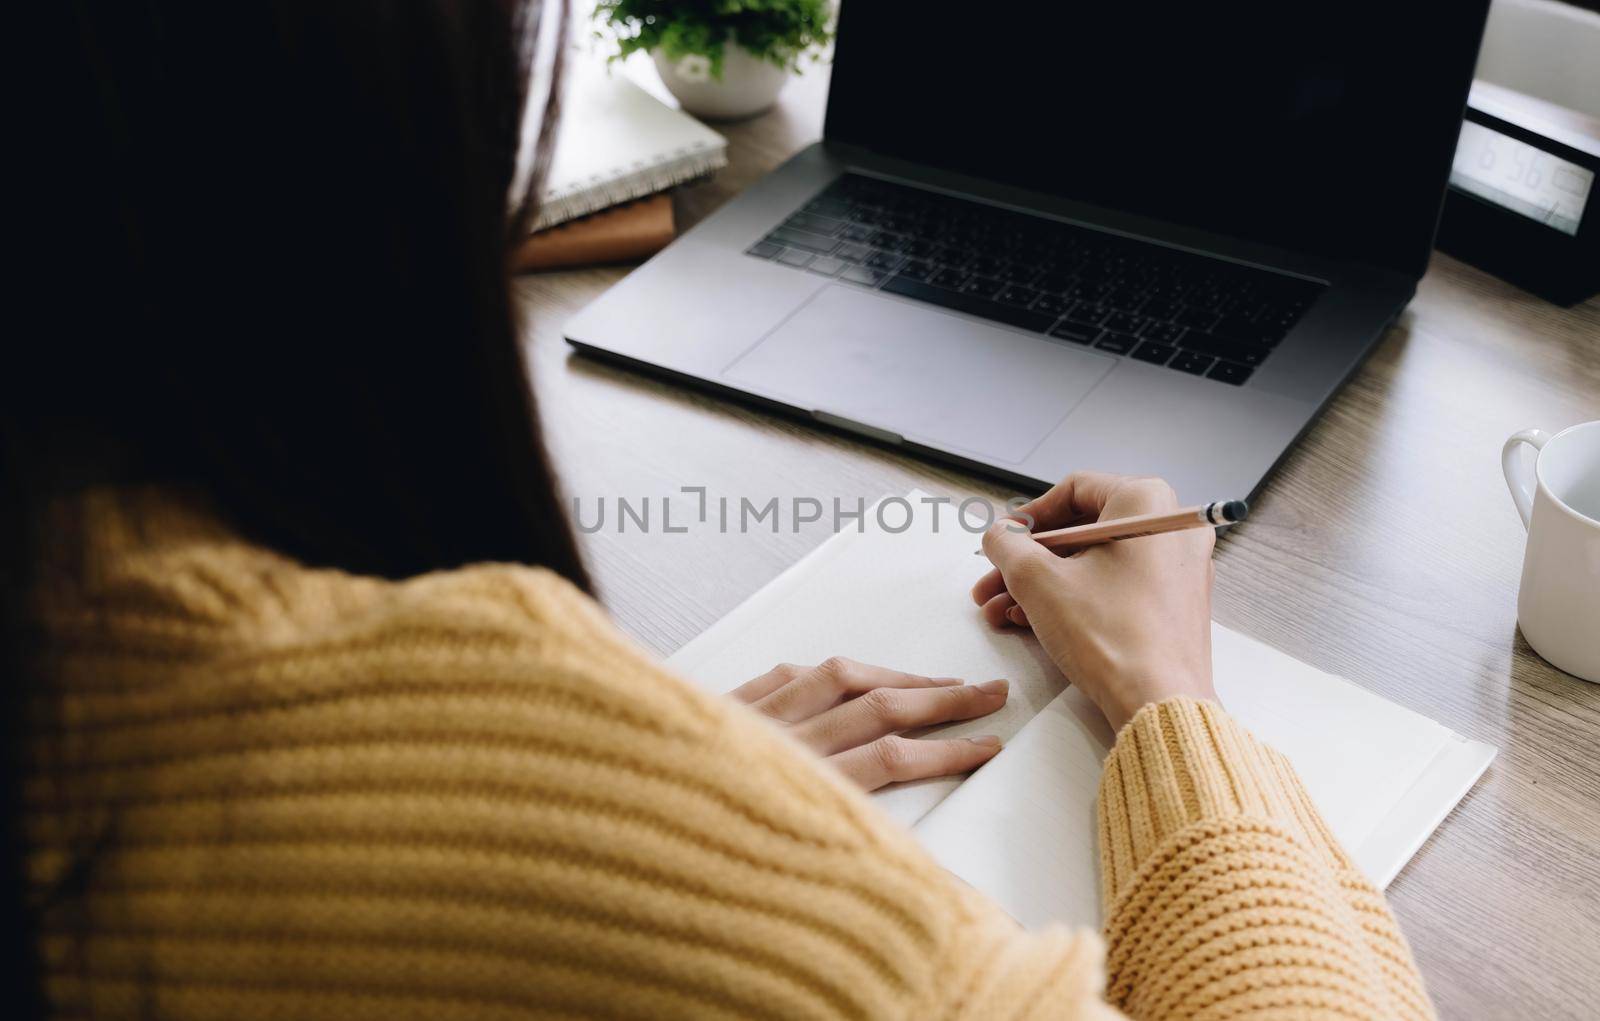 Beautiful woman writing taking notes while sitting in front her computer laptop at the wooden working table over living room bookshelf as background..